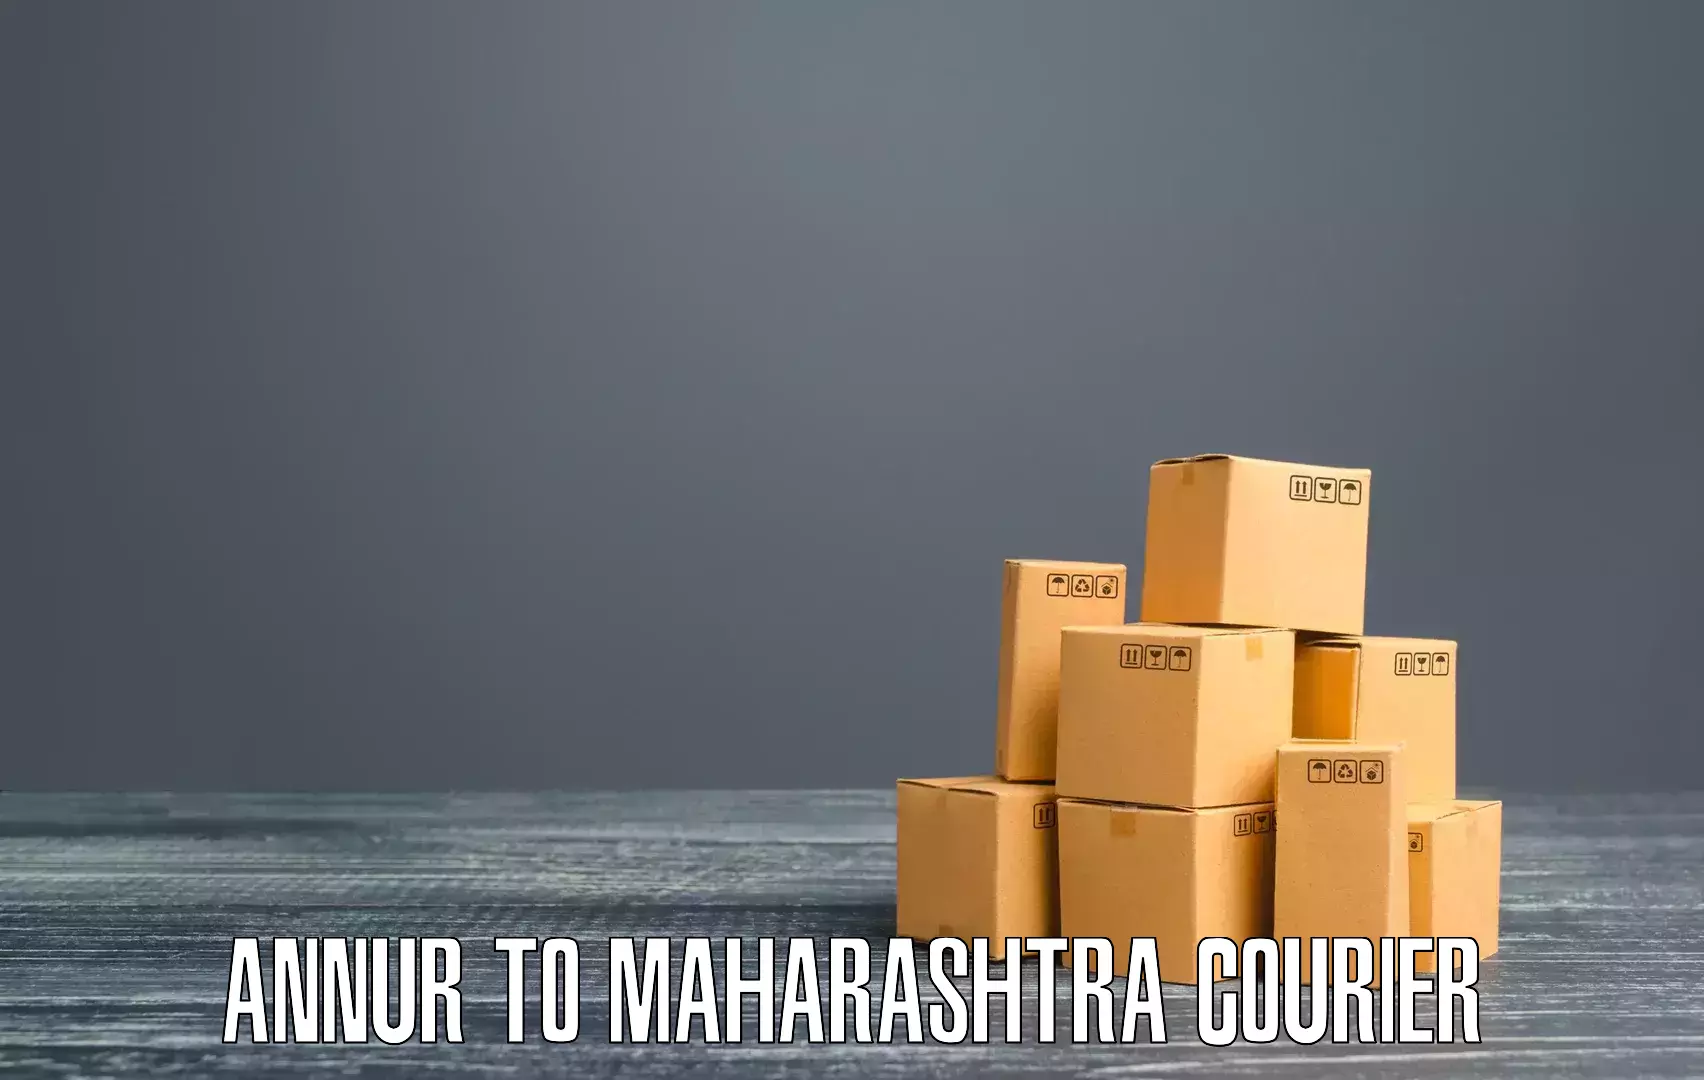 Courier service partnerships Annur to Mangaon